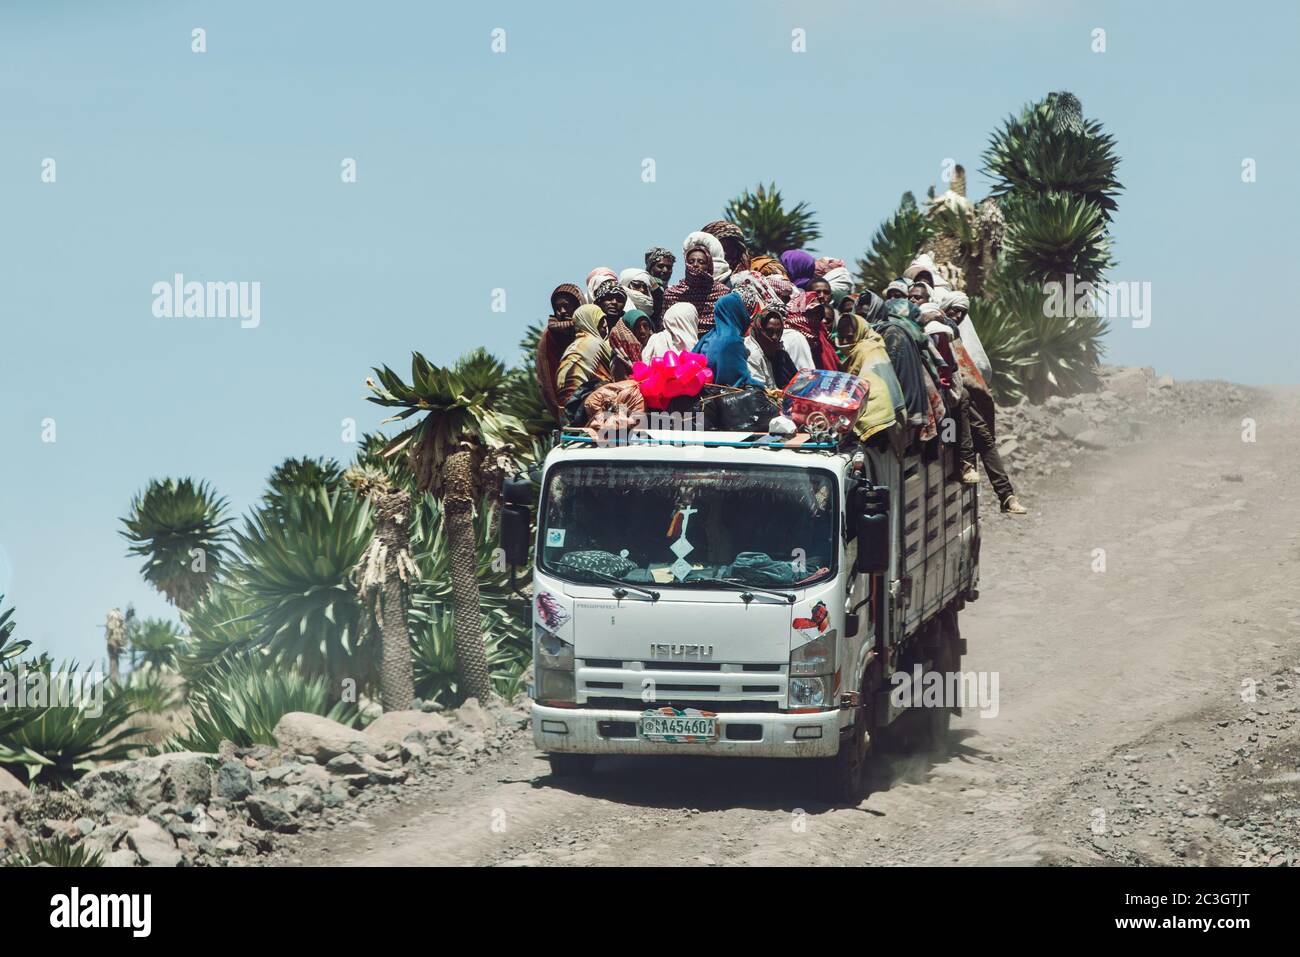 People traveling dangerously on truck Stock Photo